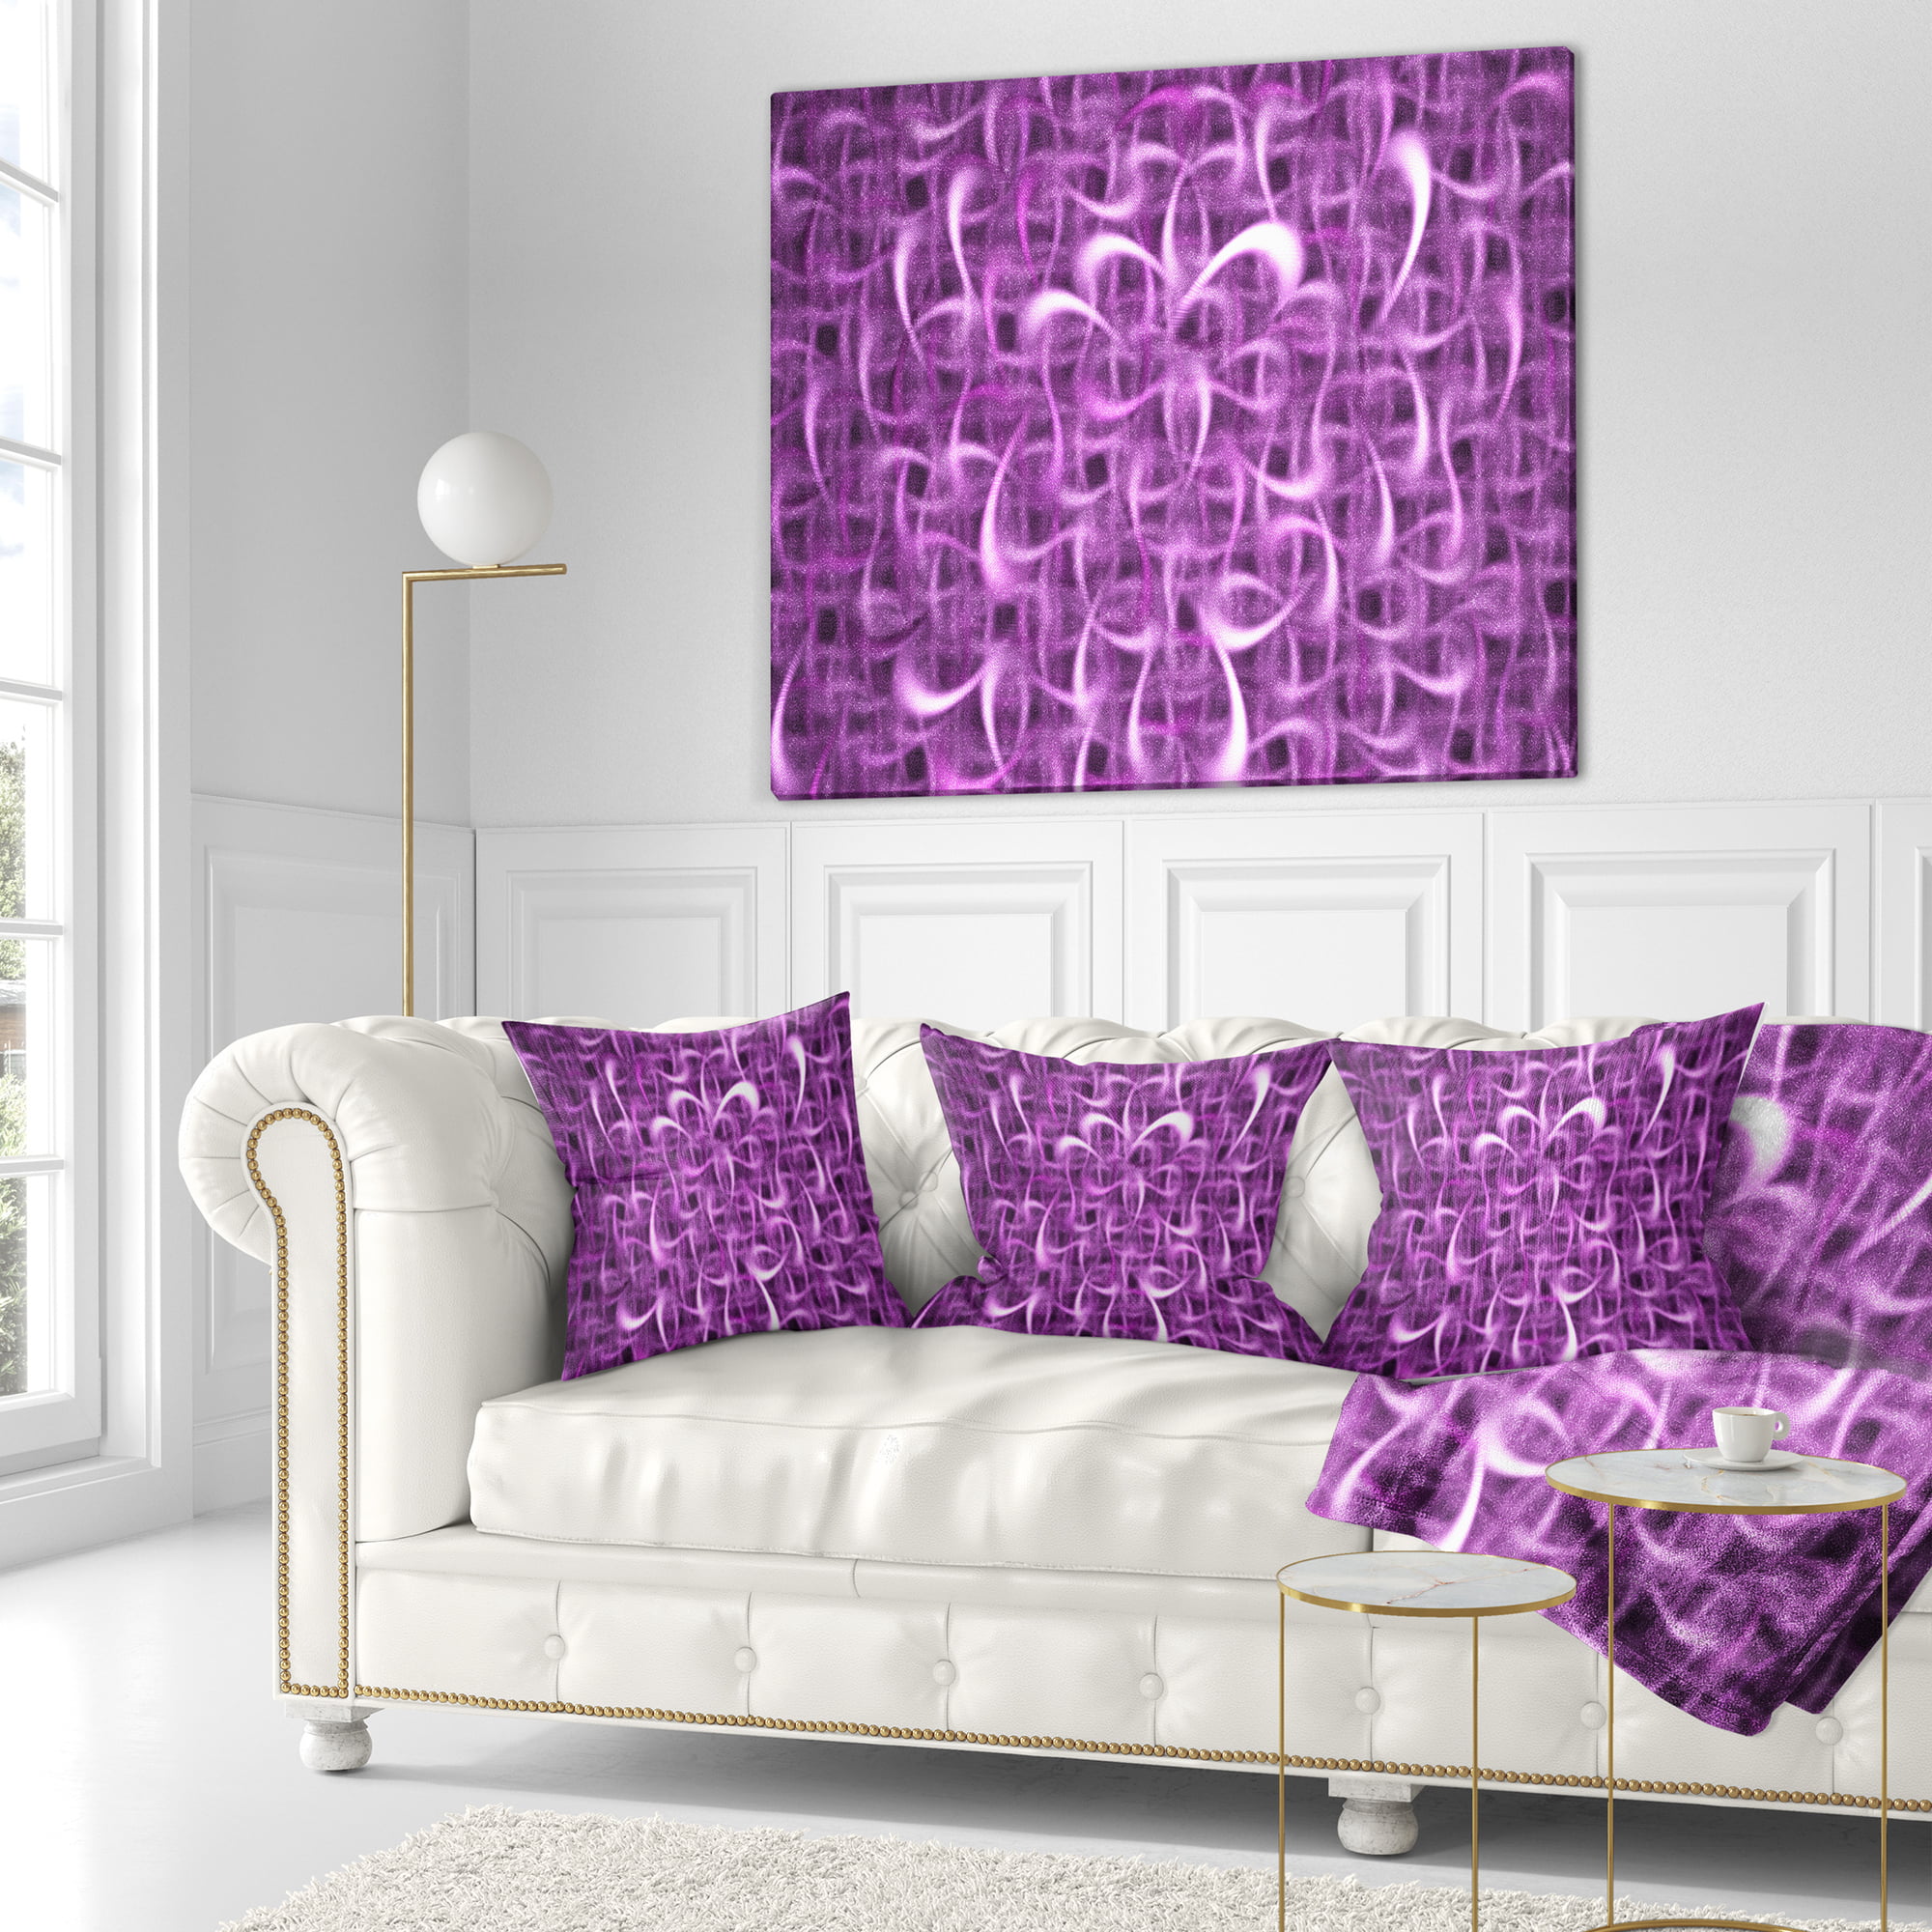 Sofa Throw Pillow 26 in x 26 in in Designart CU15987-26-26 Purple Watercolor Fractal Pattern Abstract Cushion Cover for Living Room 